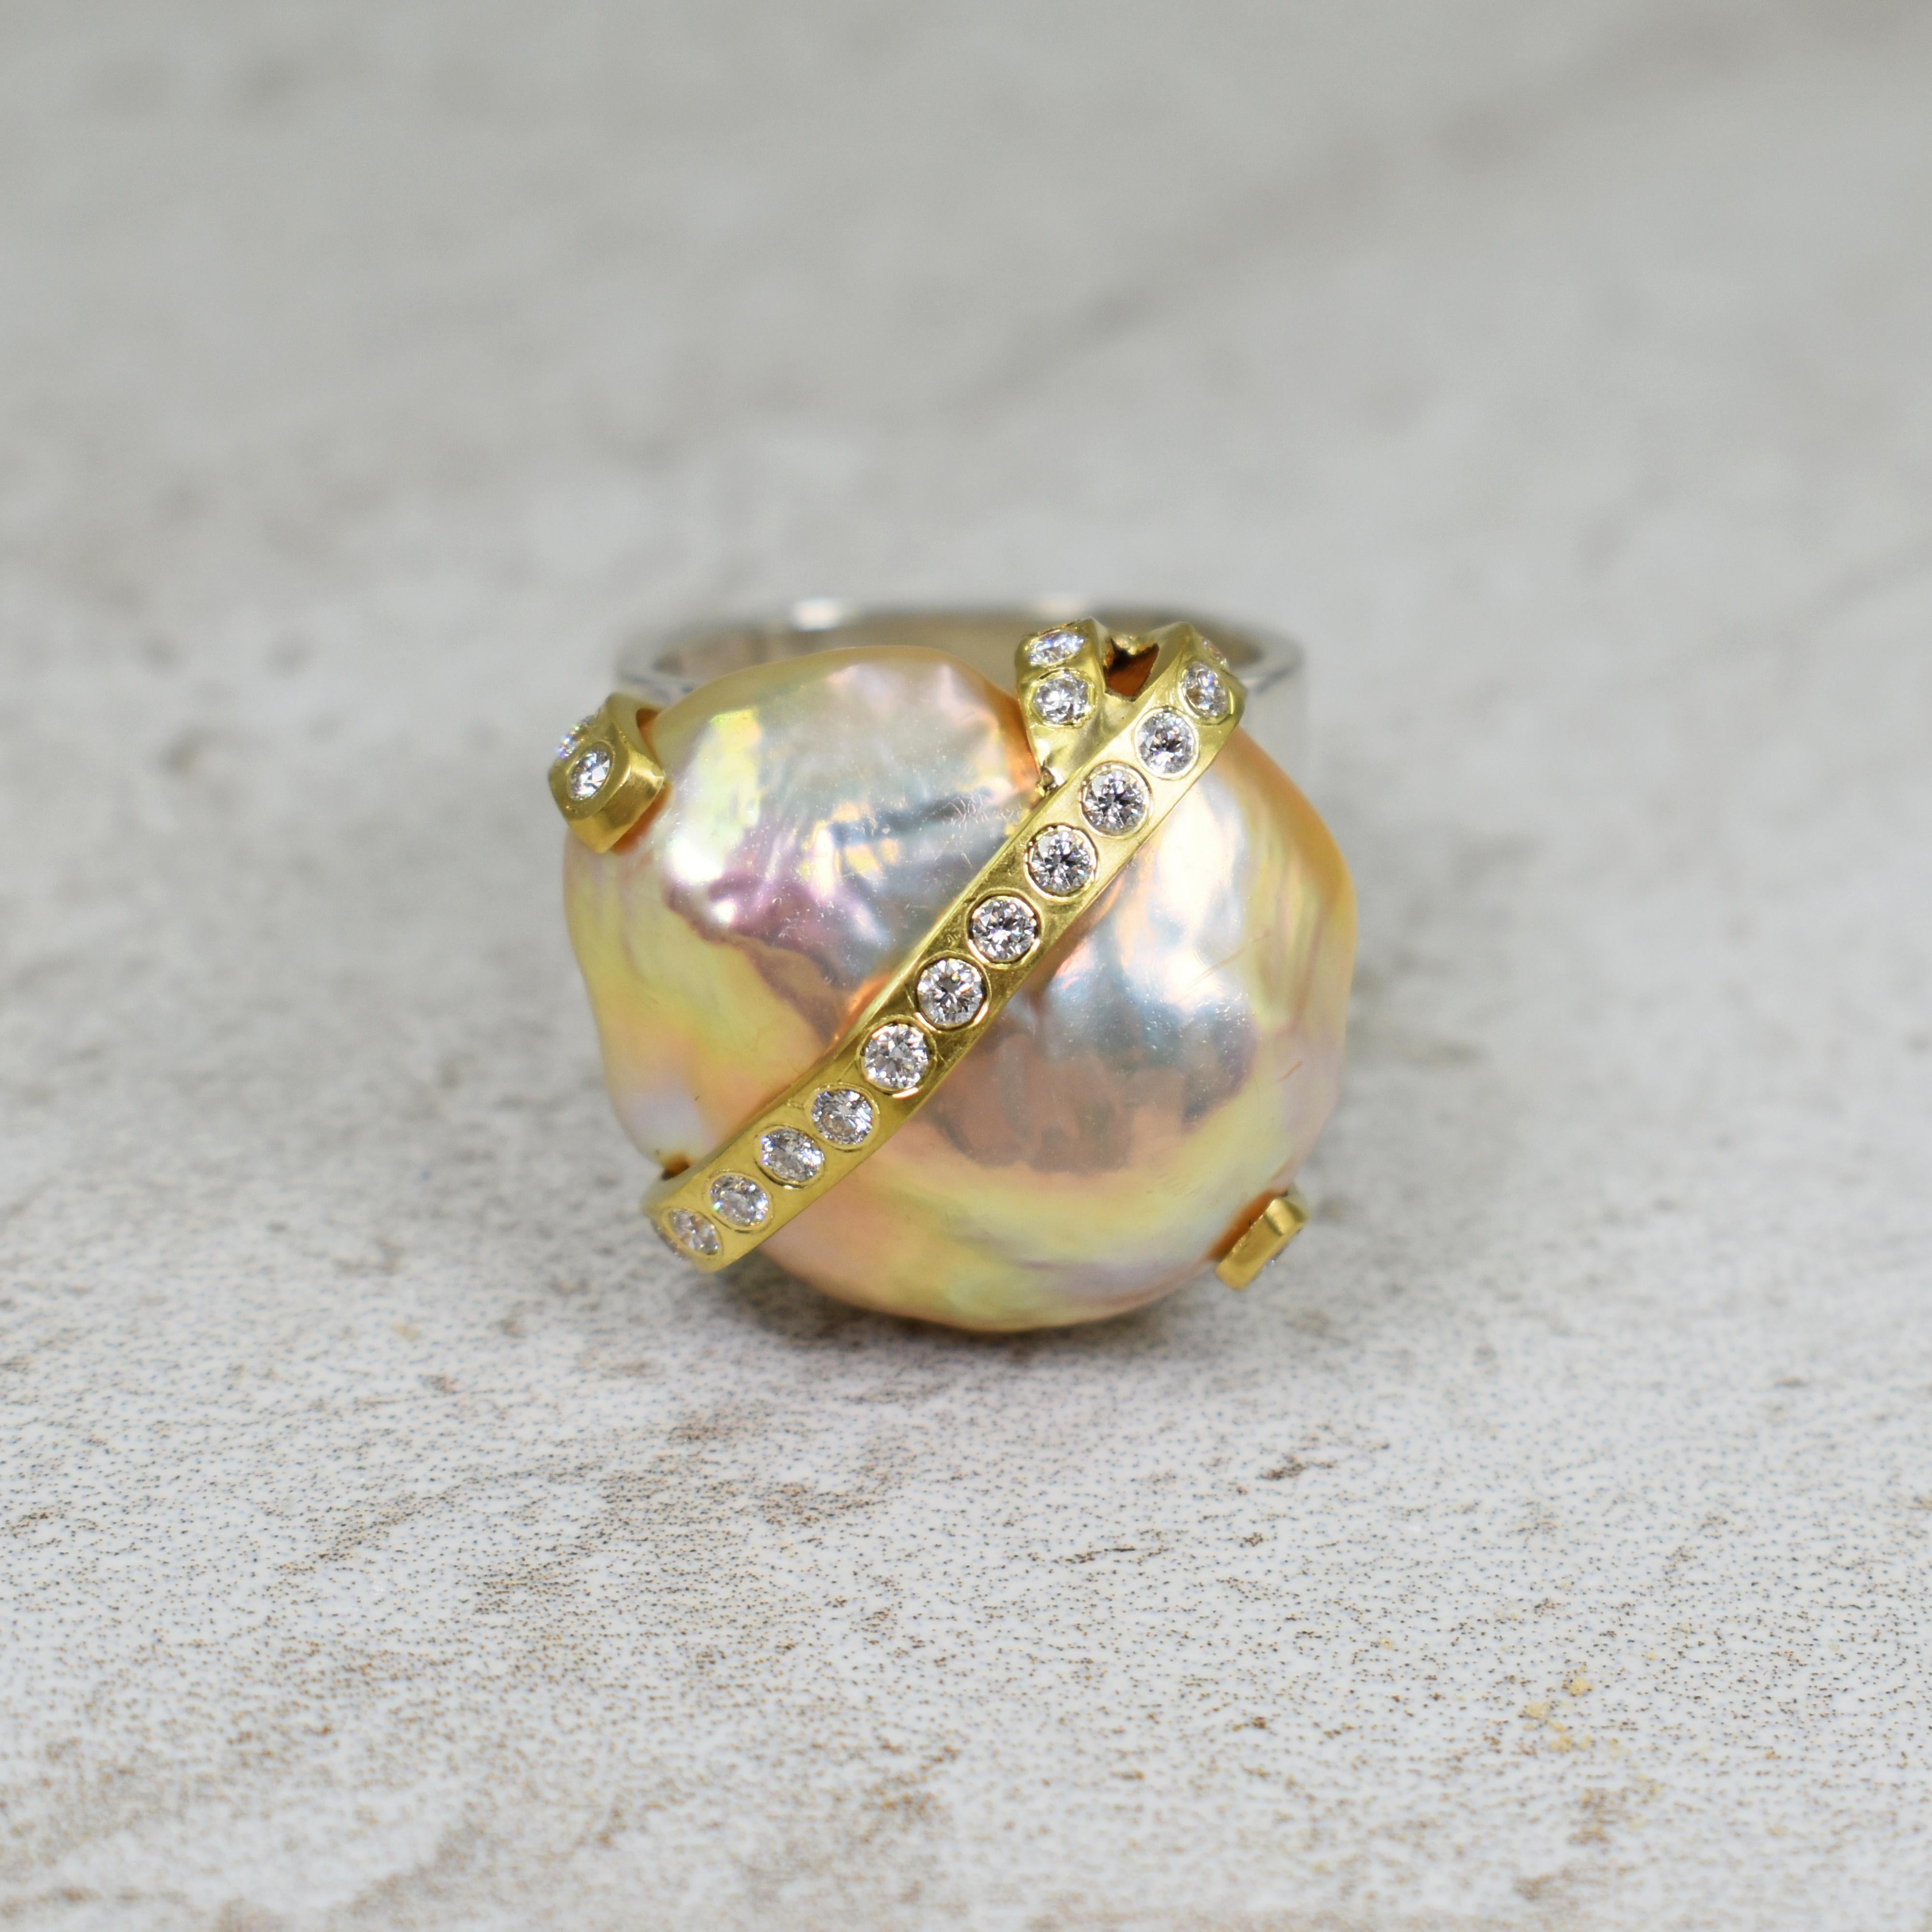 Exceptional peachy pink Freshwater Baroque Pearl set with Diamond and 22k yellow gold ribbon mounted on a signature sterling silver square ring band. Ring size is 6 1/2. The 22k yellow gold ribbon setting has 24 diamonds (0.36 total carat weight,